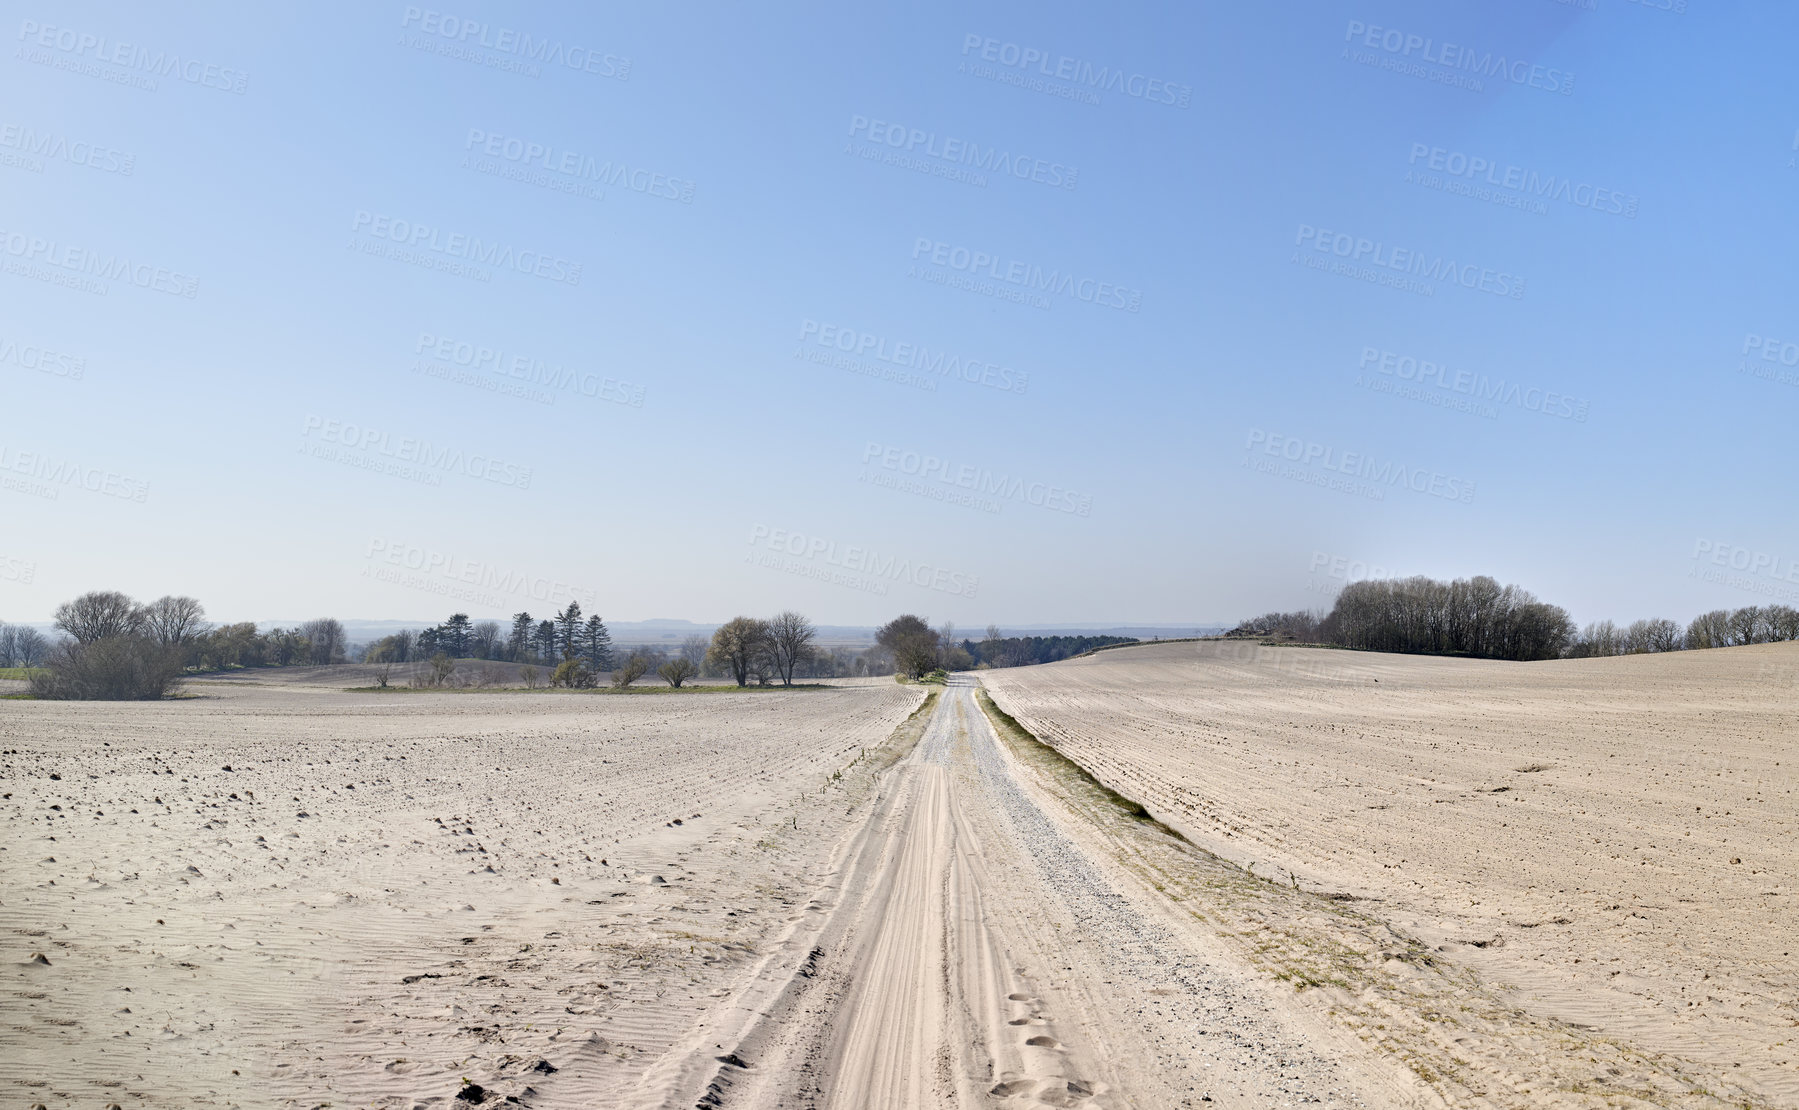 Buy stock photo A desolate agricultural farmland caused by summer heat droughts and impact on agriculture industry. Open and empty dry sand. Sandy and barren land with trees in the distance and blue sky background.